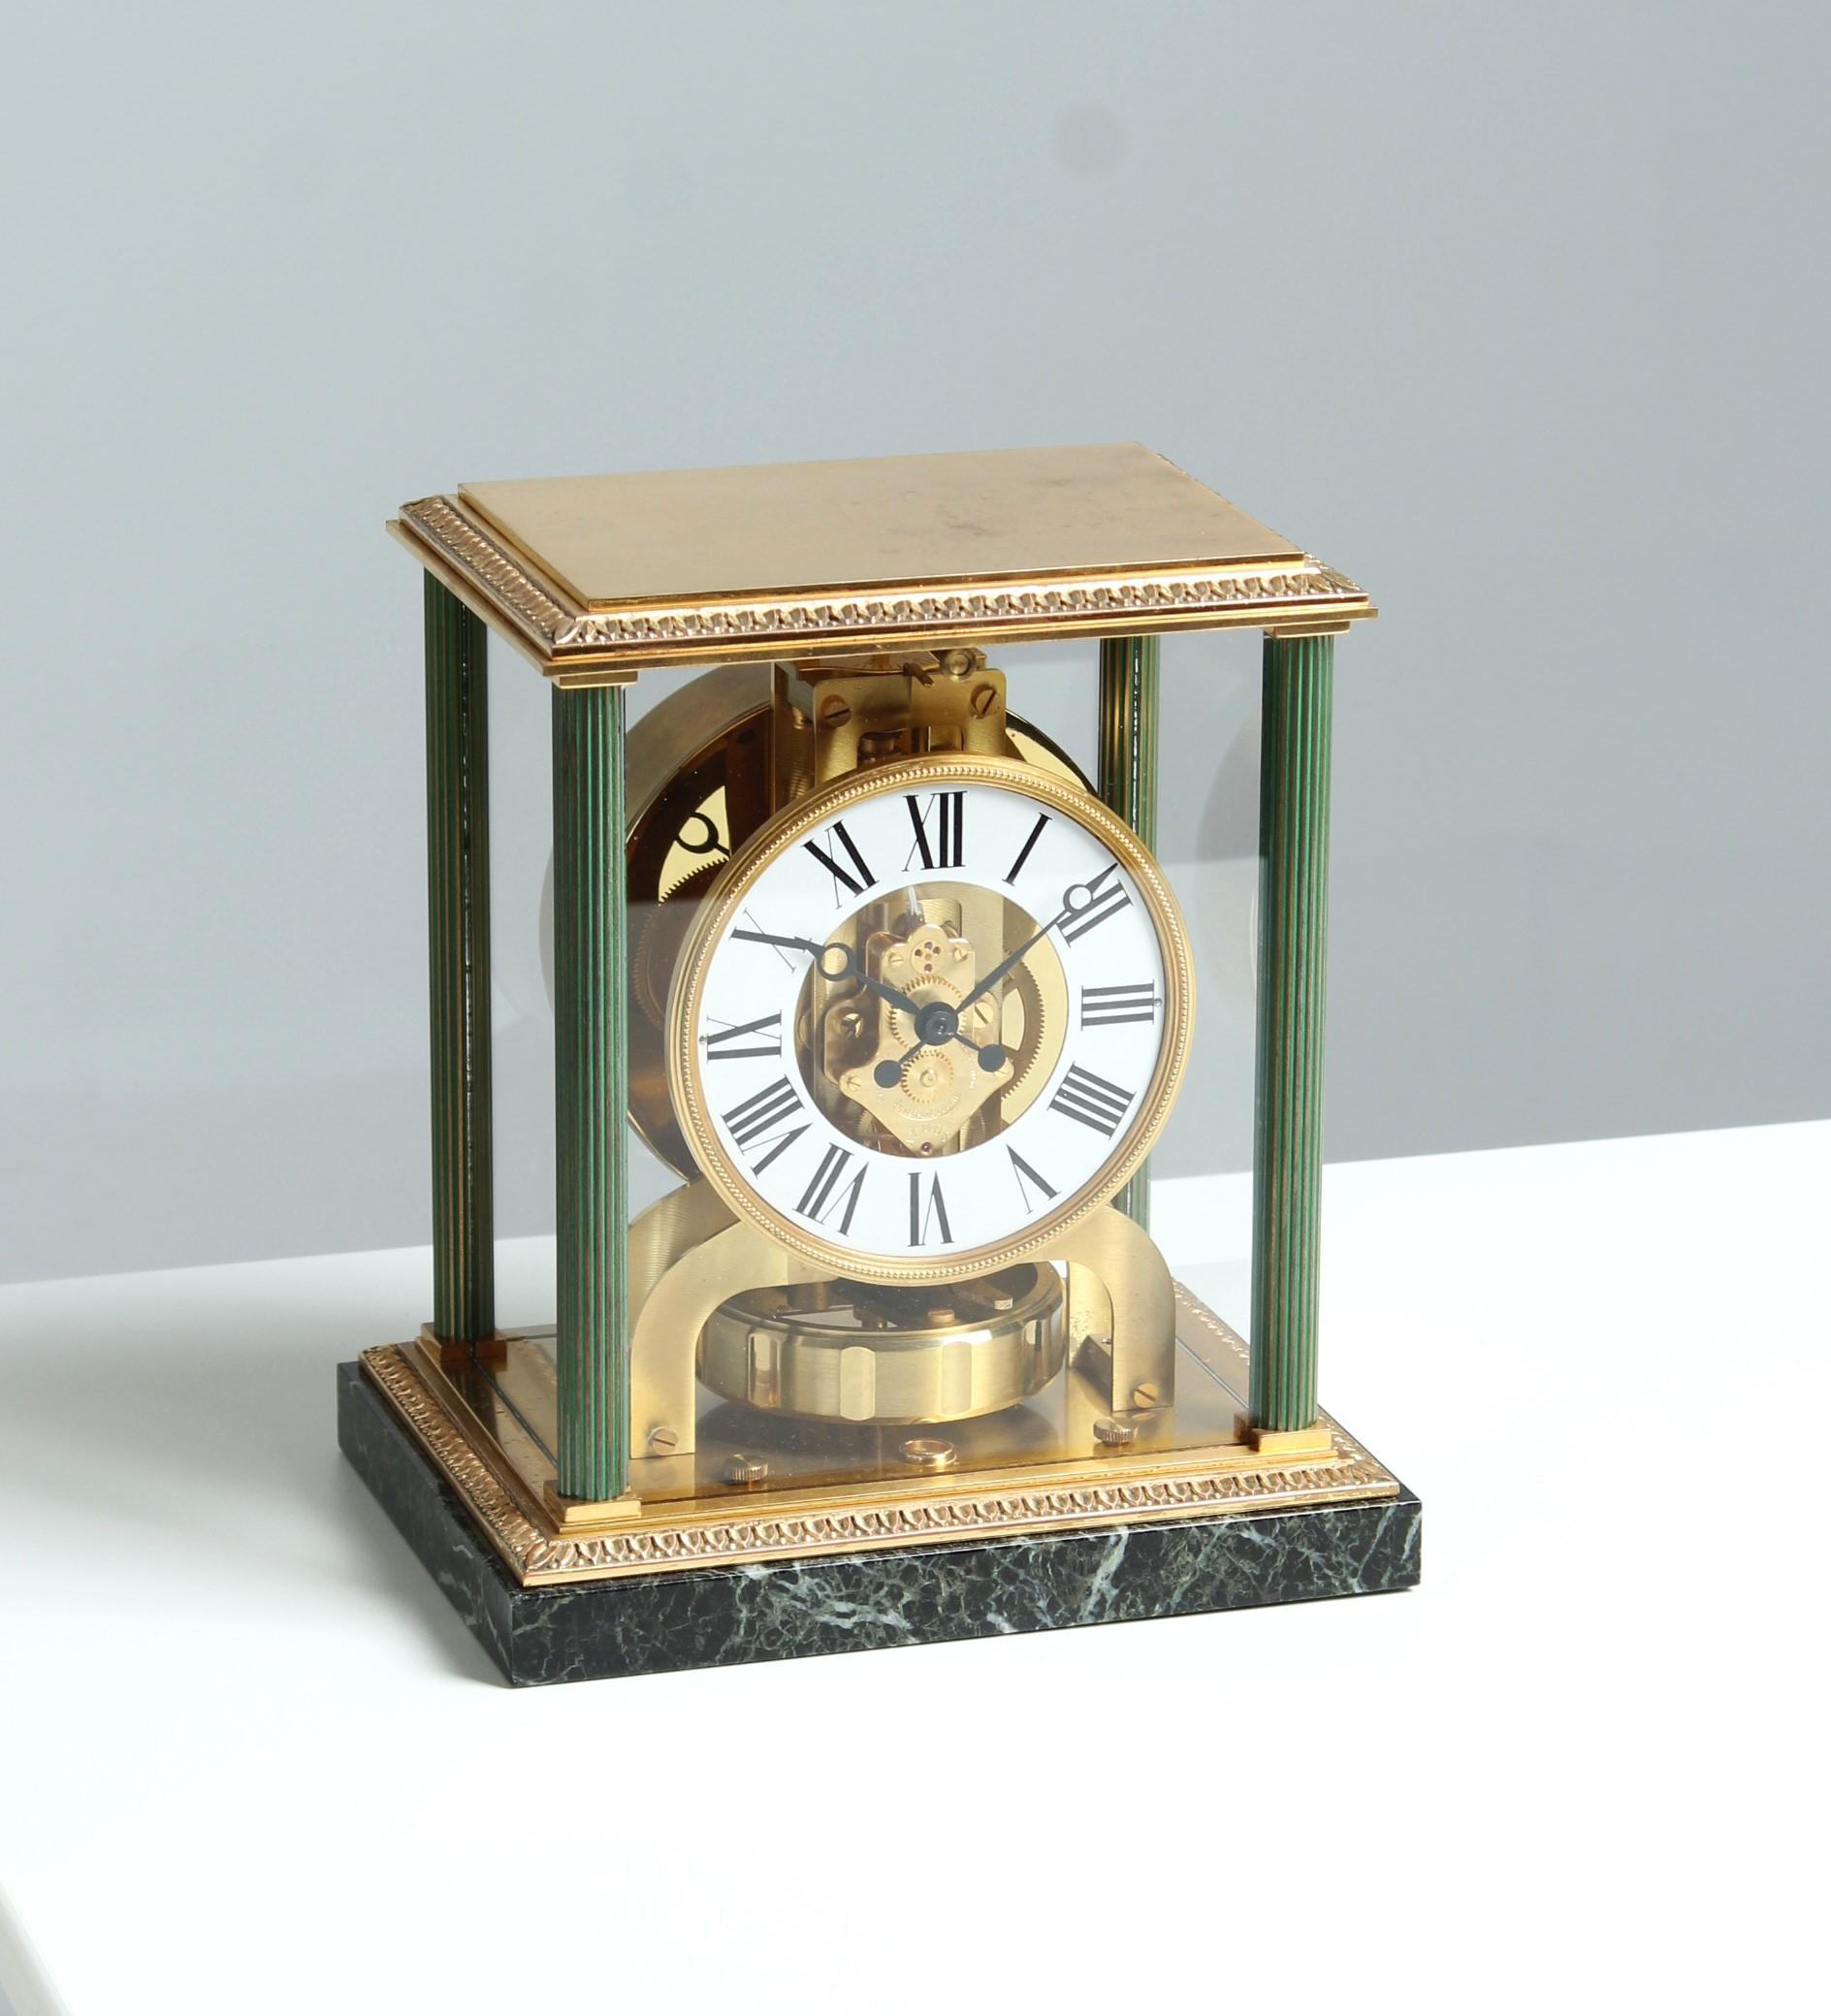 Jaeger LeCoultre - Atmos Vendome

Switzerland
Brass, marble
Year of manufacture 1962

Dimensions: H x W x D: 24 x 21 x 16 cm

Description:
Atmos Vendome calibre 526. model number 5857 with marble base and fluted columns.
White dial with Roman